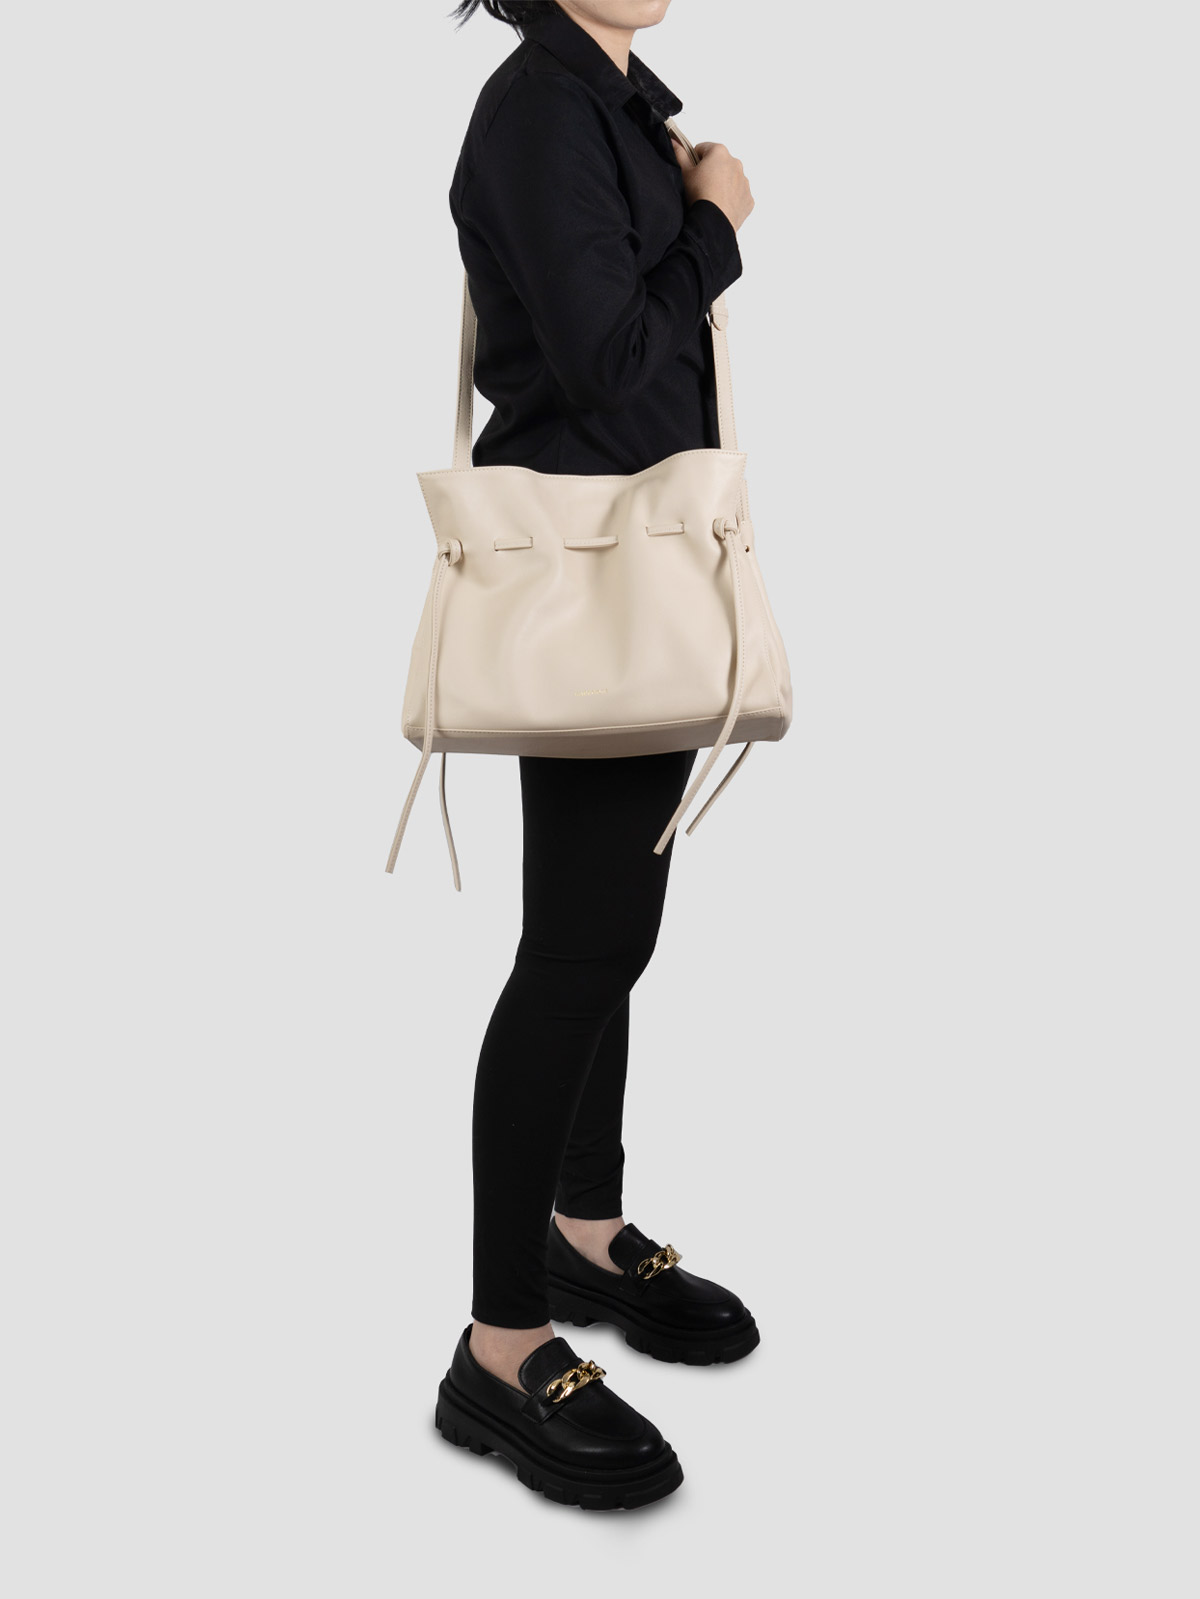 marroque wendy-tote-ivorywhite leather bag.